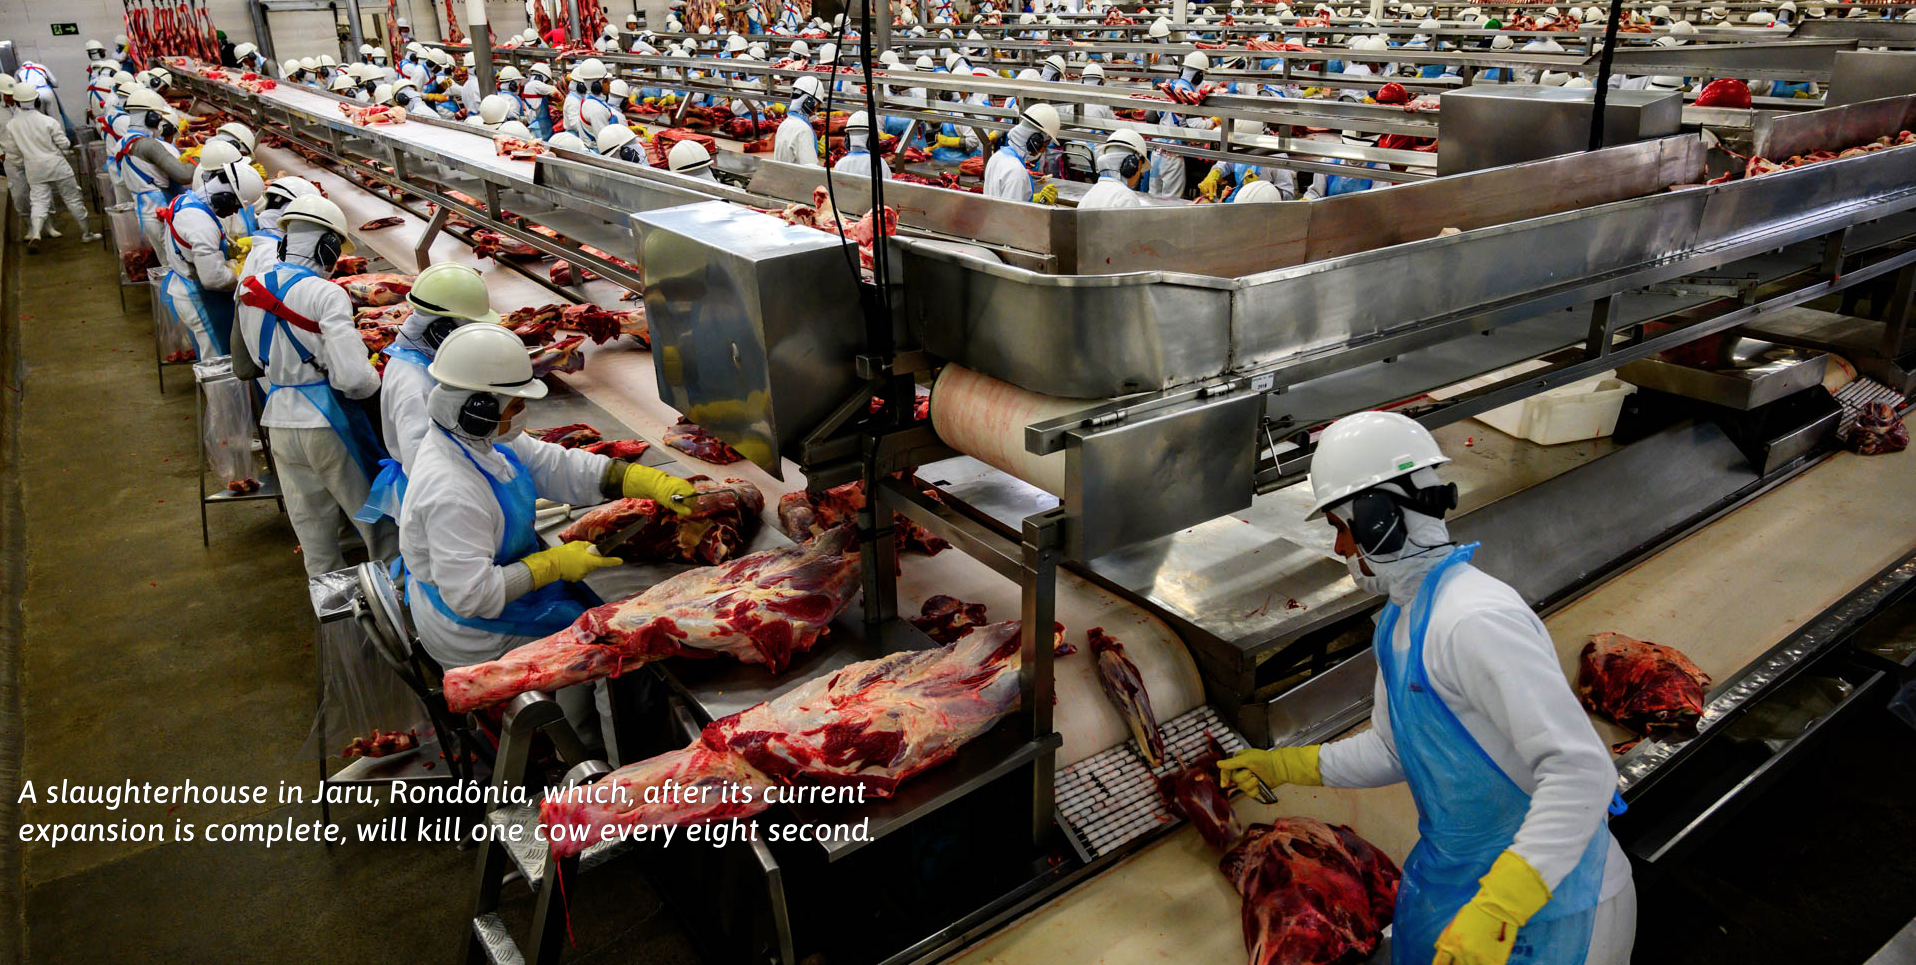 A slaughterhouse in Jaru, Rondônia, which, after its current expansion is complete, will kill one cow every eight second. Image by Sebastián Liste. Brazil, 2019.